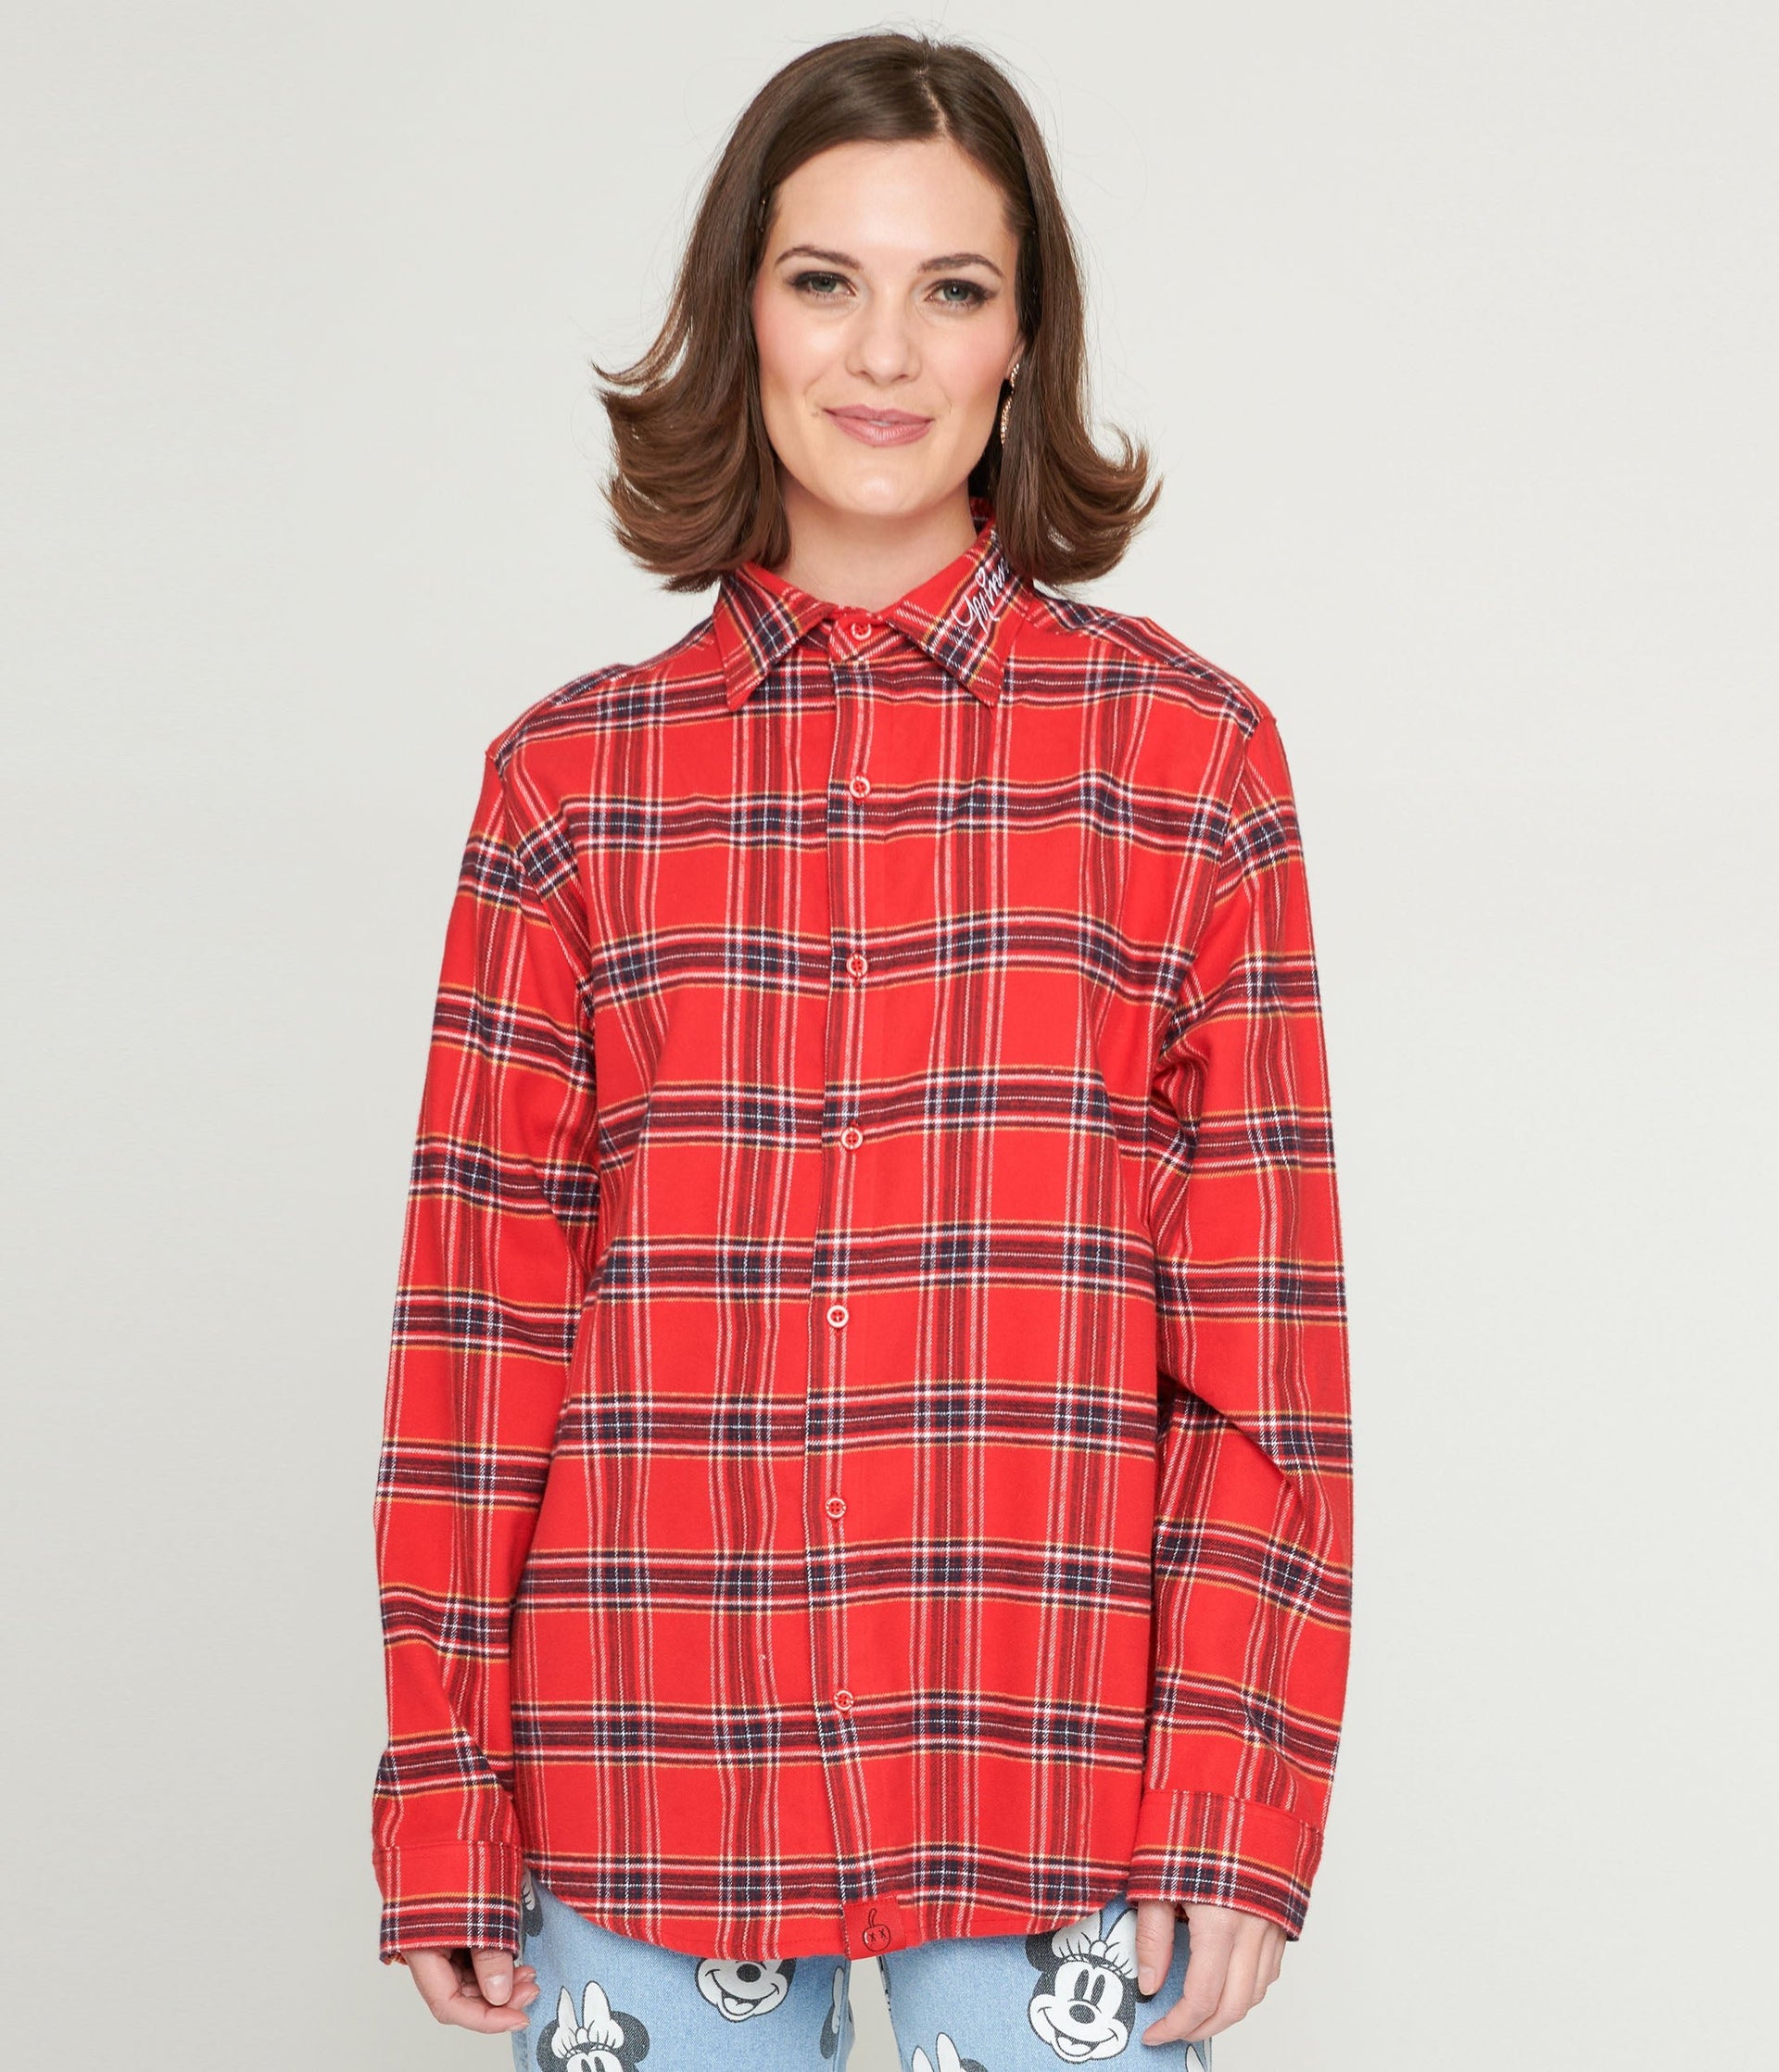 Cakeworthy Minnie Mouse Bow Red Plaid Unisex Flannel - Unique Vintage - Womens, TOPS, WOVEN TOPS